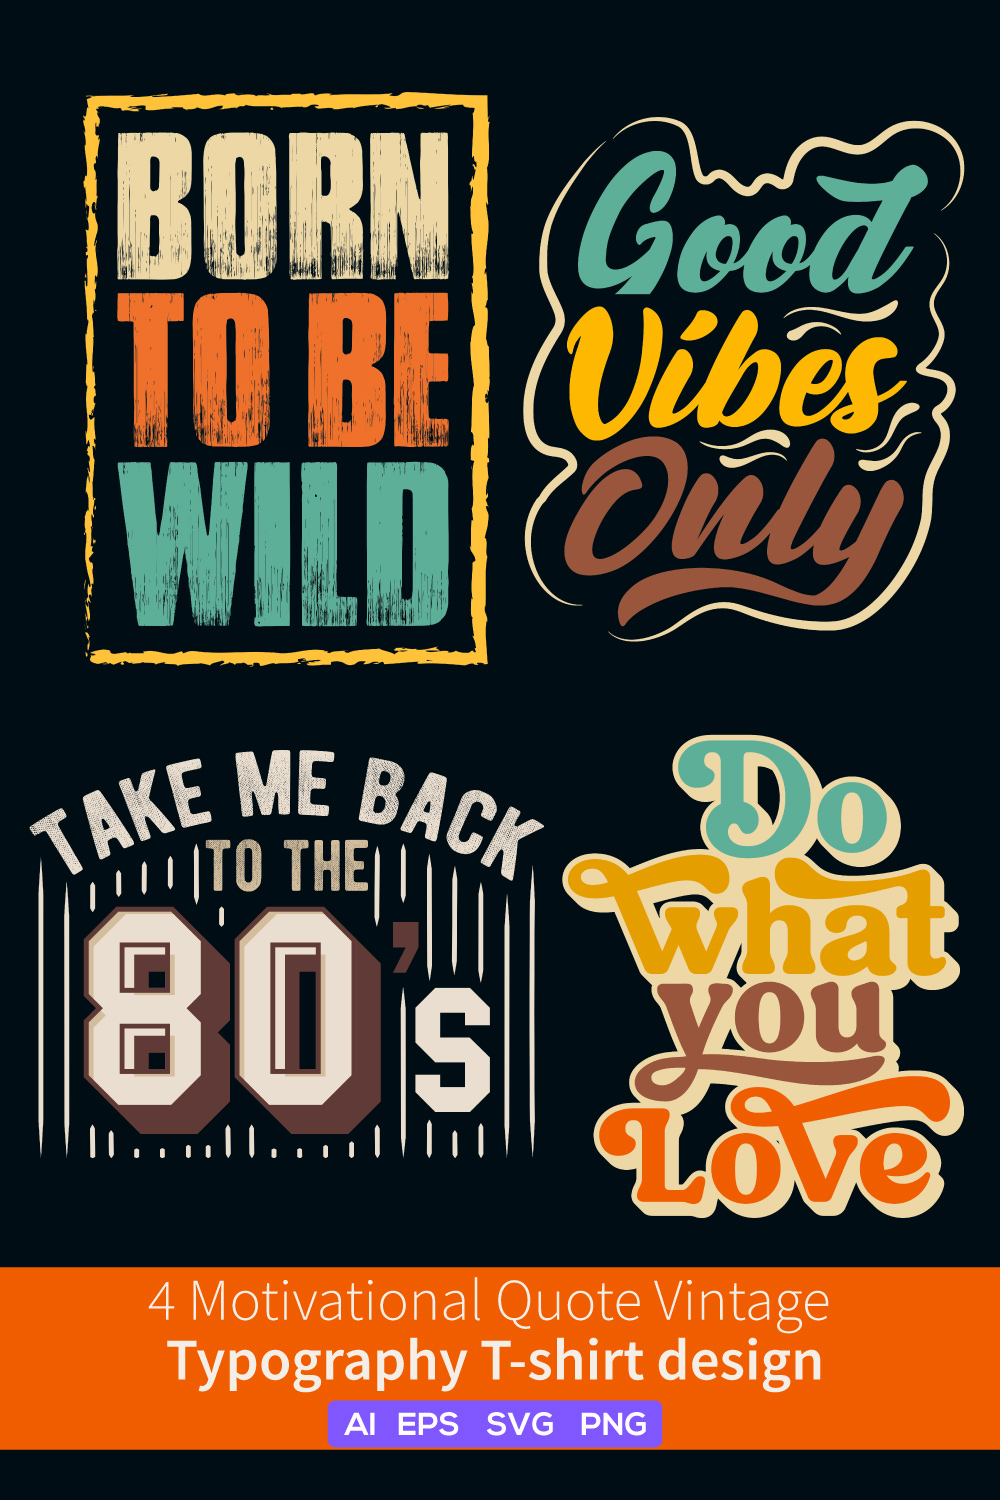 Find Your Inspiration with our Vintage Typography T-Shirt Bundle - Featuring Motivational Quotes and Retro Style pinterest preview image.